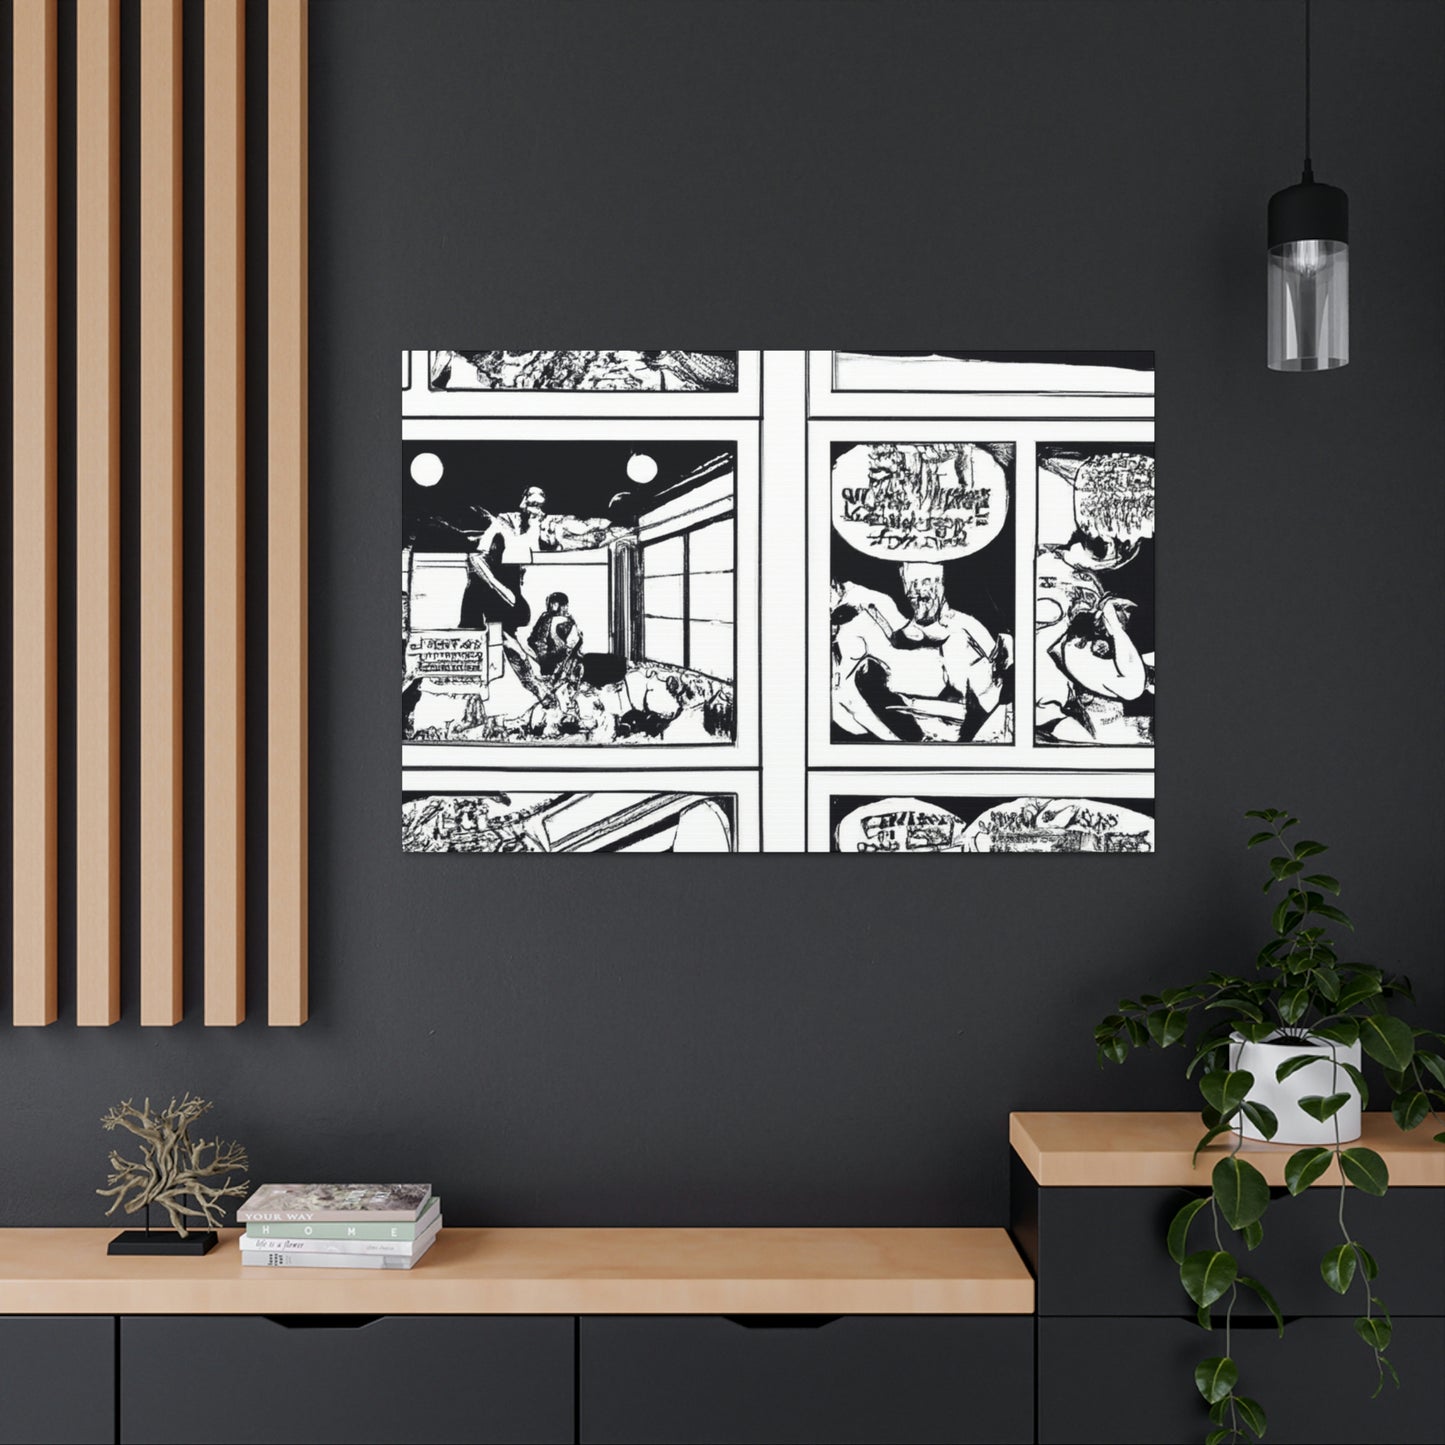 Captain Cinder - Comics Collector Canvas Wall Art For Bedroom Office Living Room